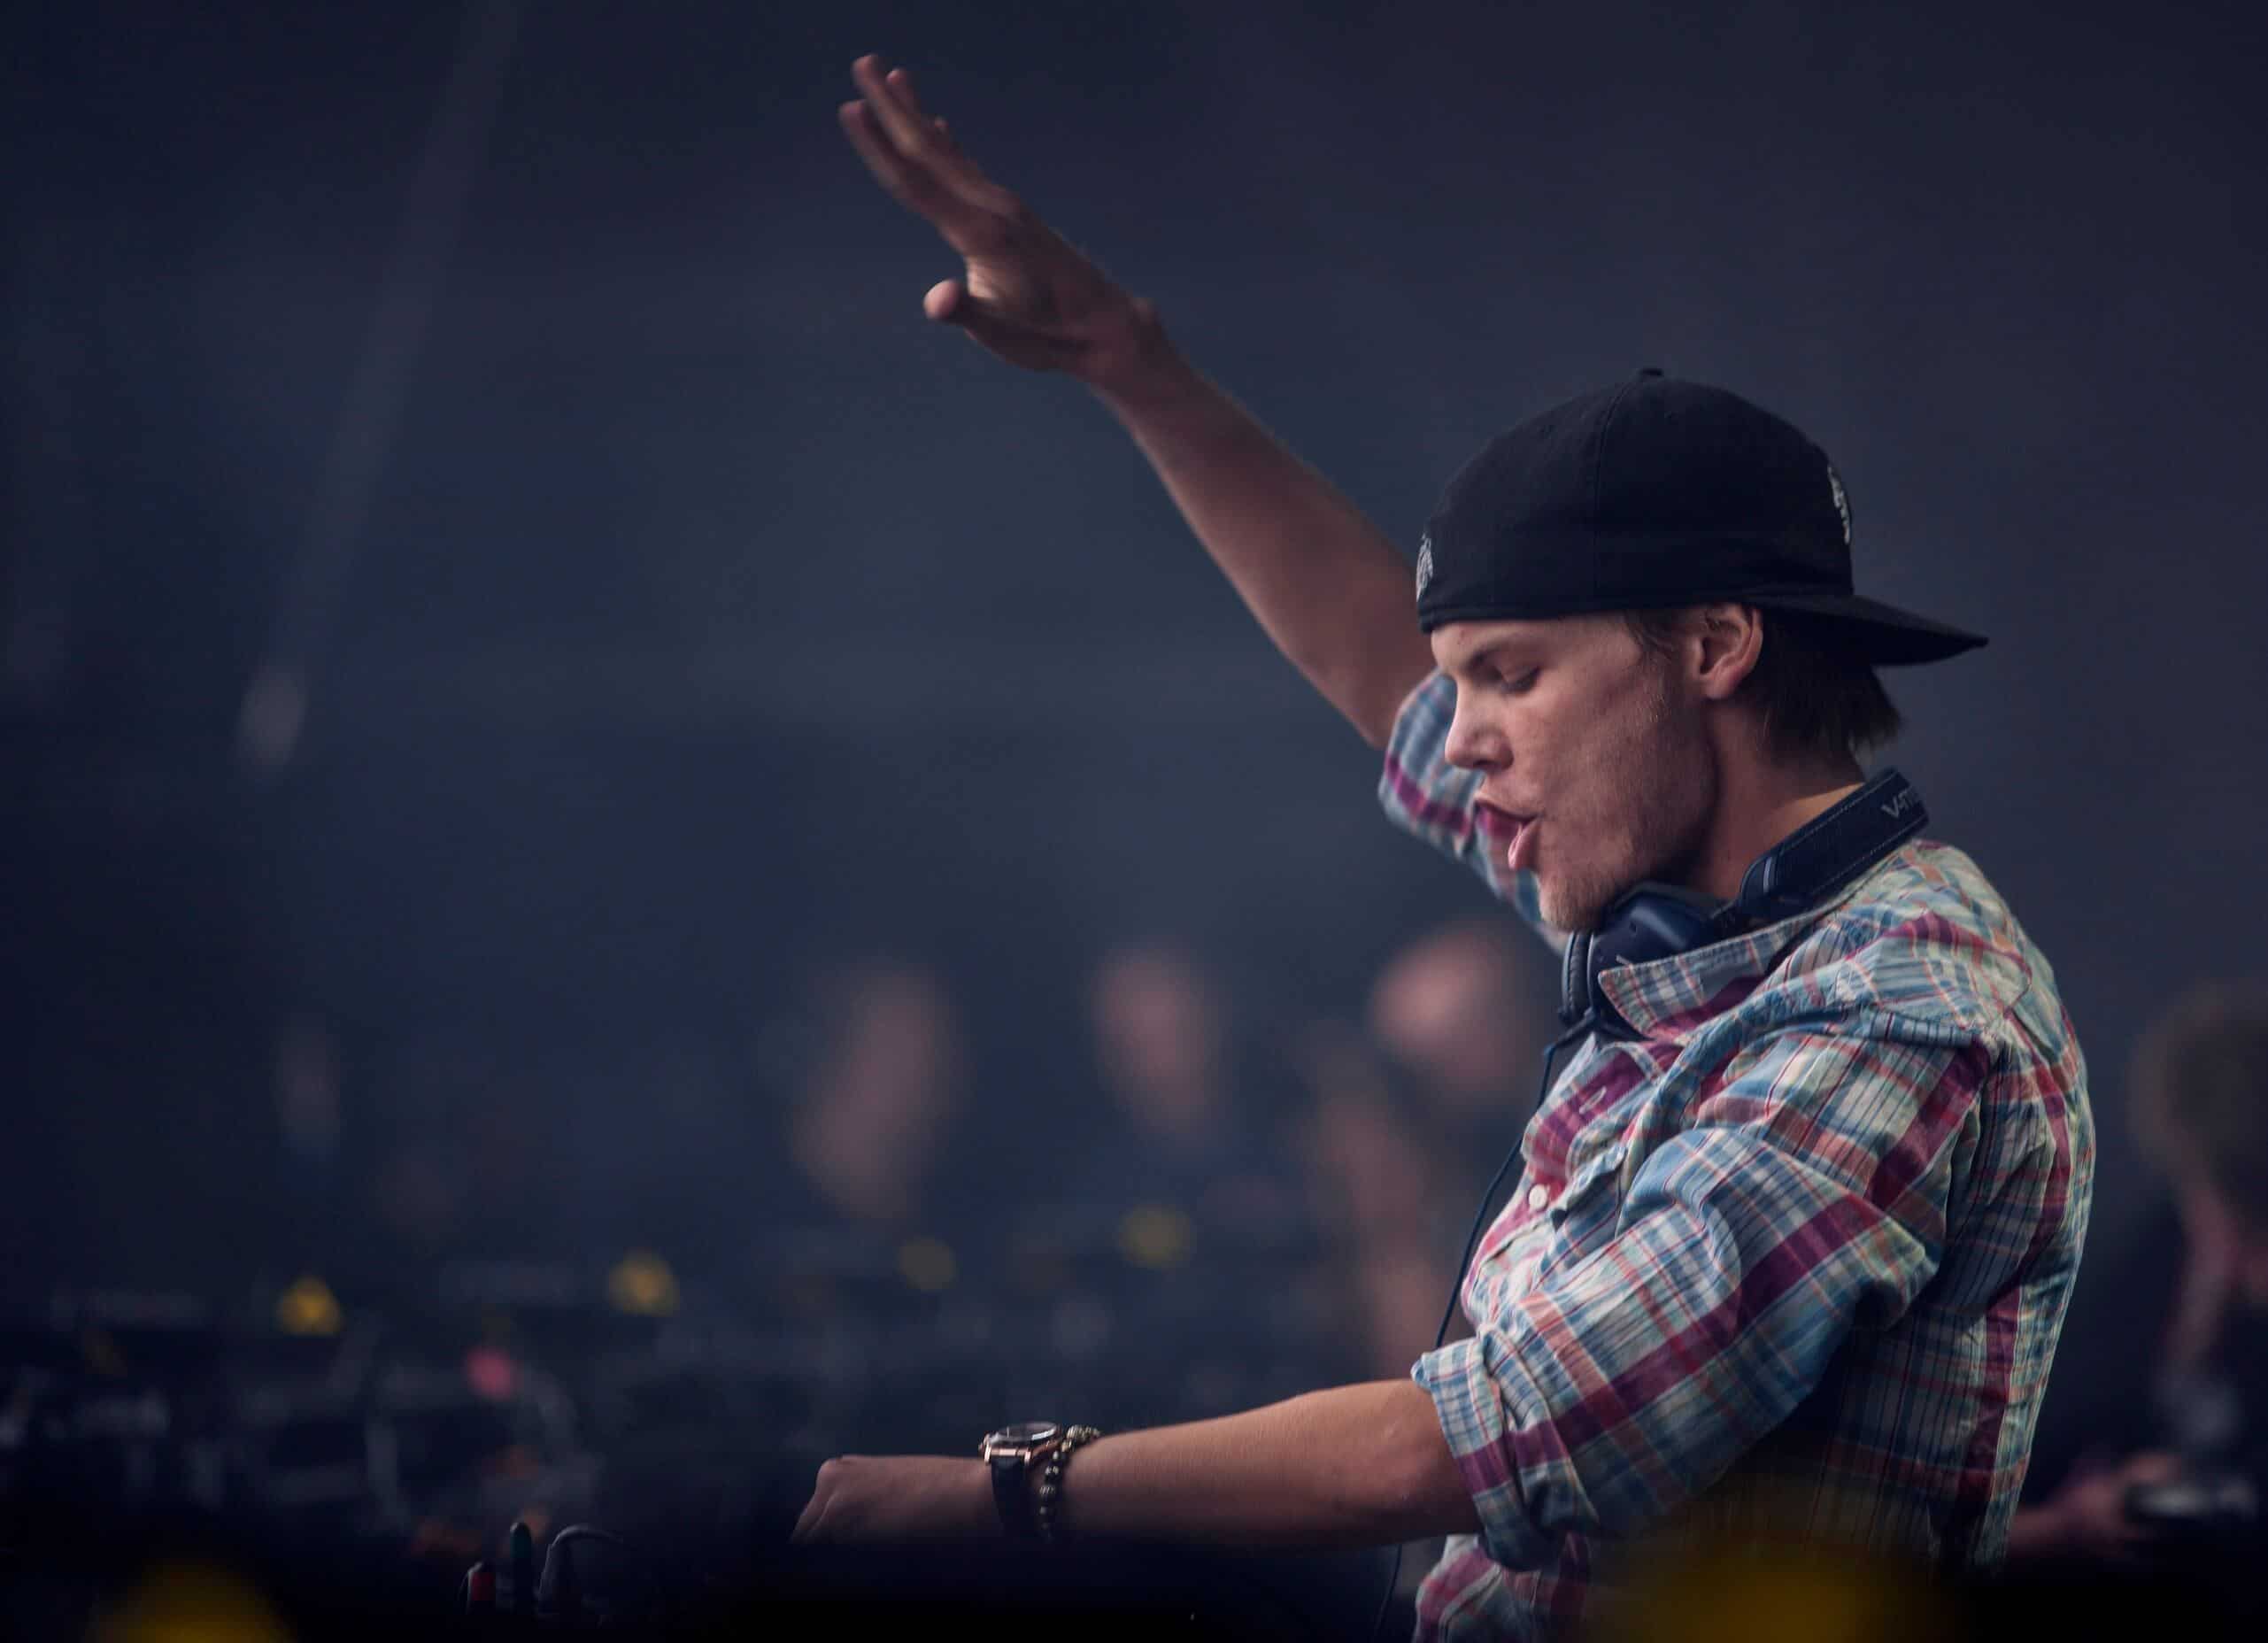 Remembering Avicii: A dive into some of his best unreleased work